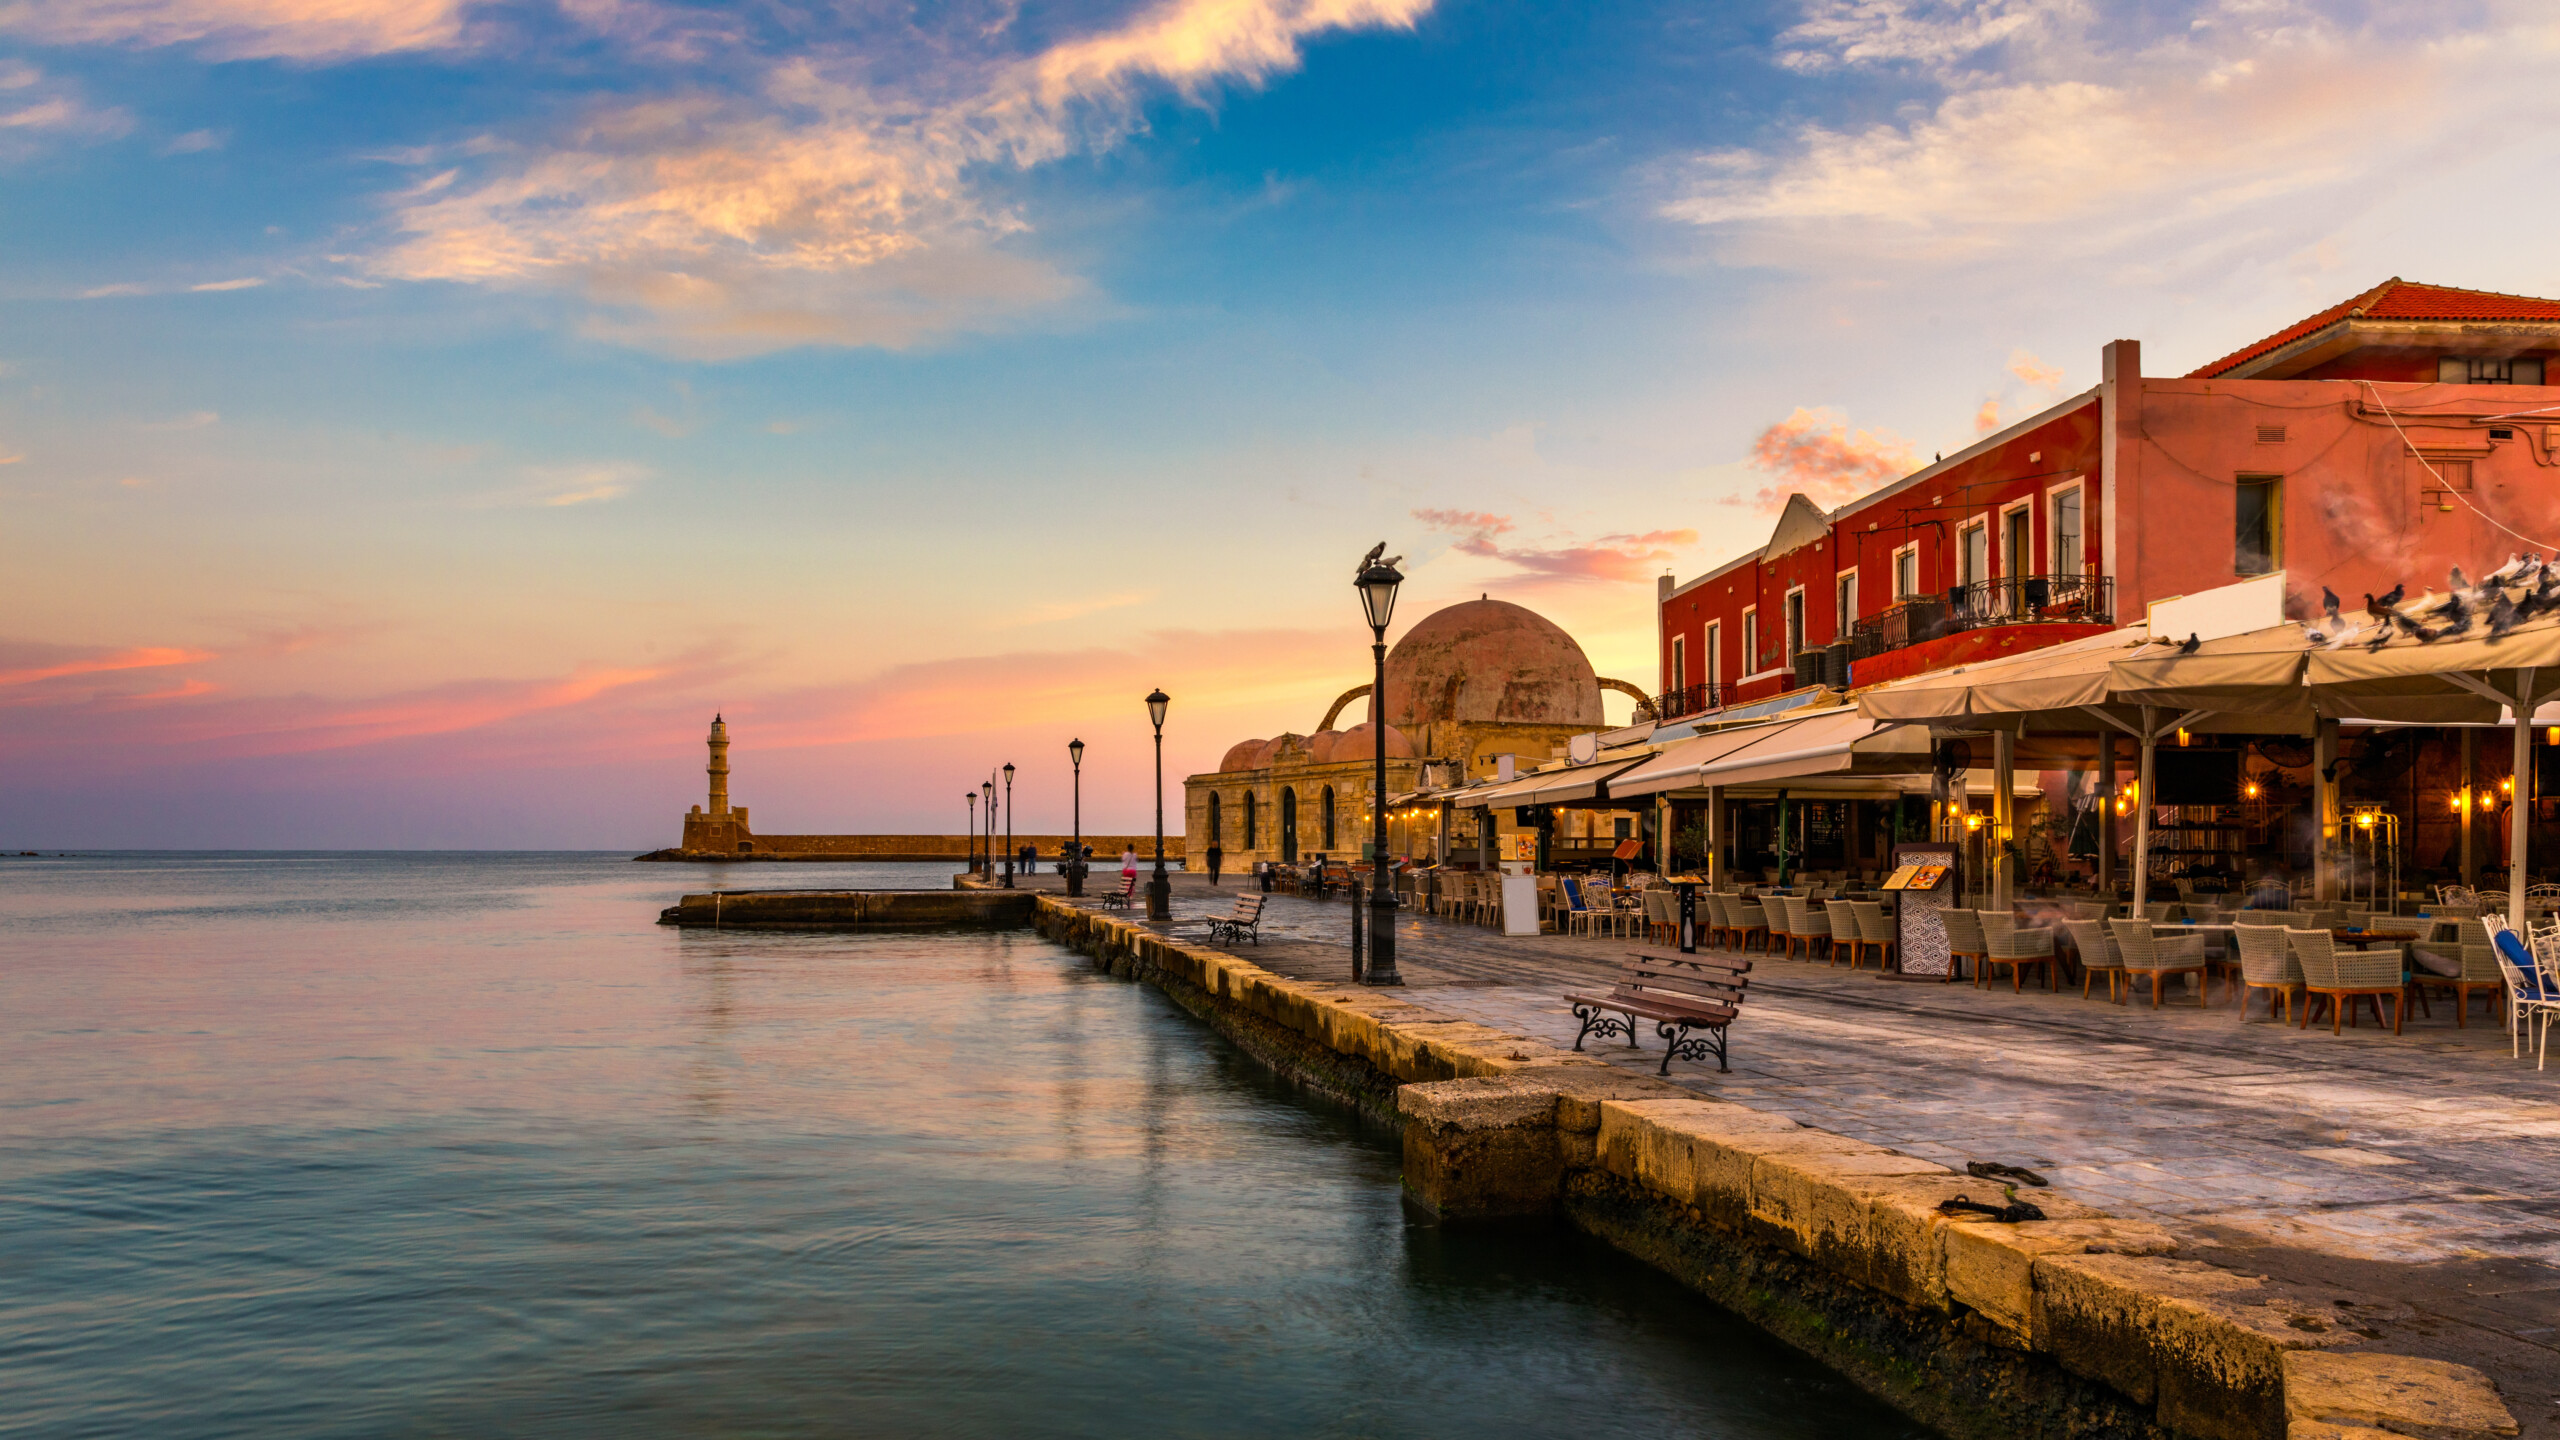 Venetian,Harbour,Of,The,City,Of,Chania,At,Sunrise,With